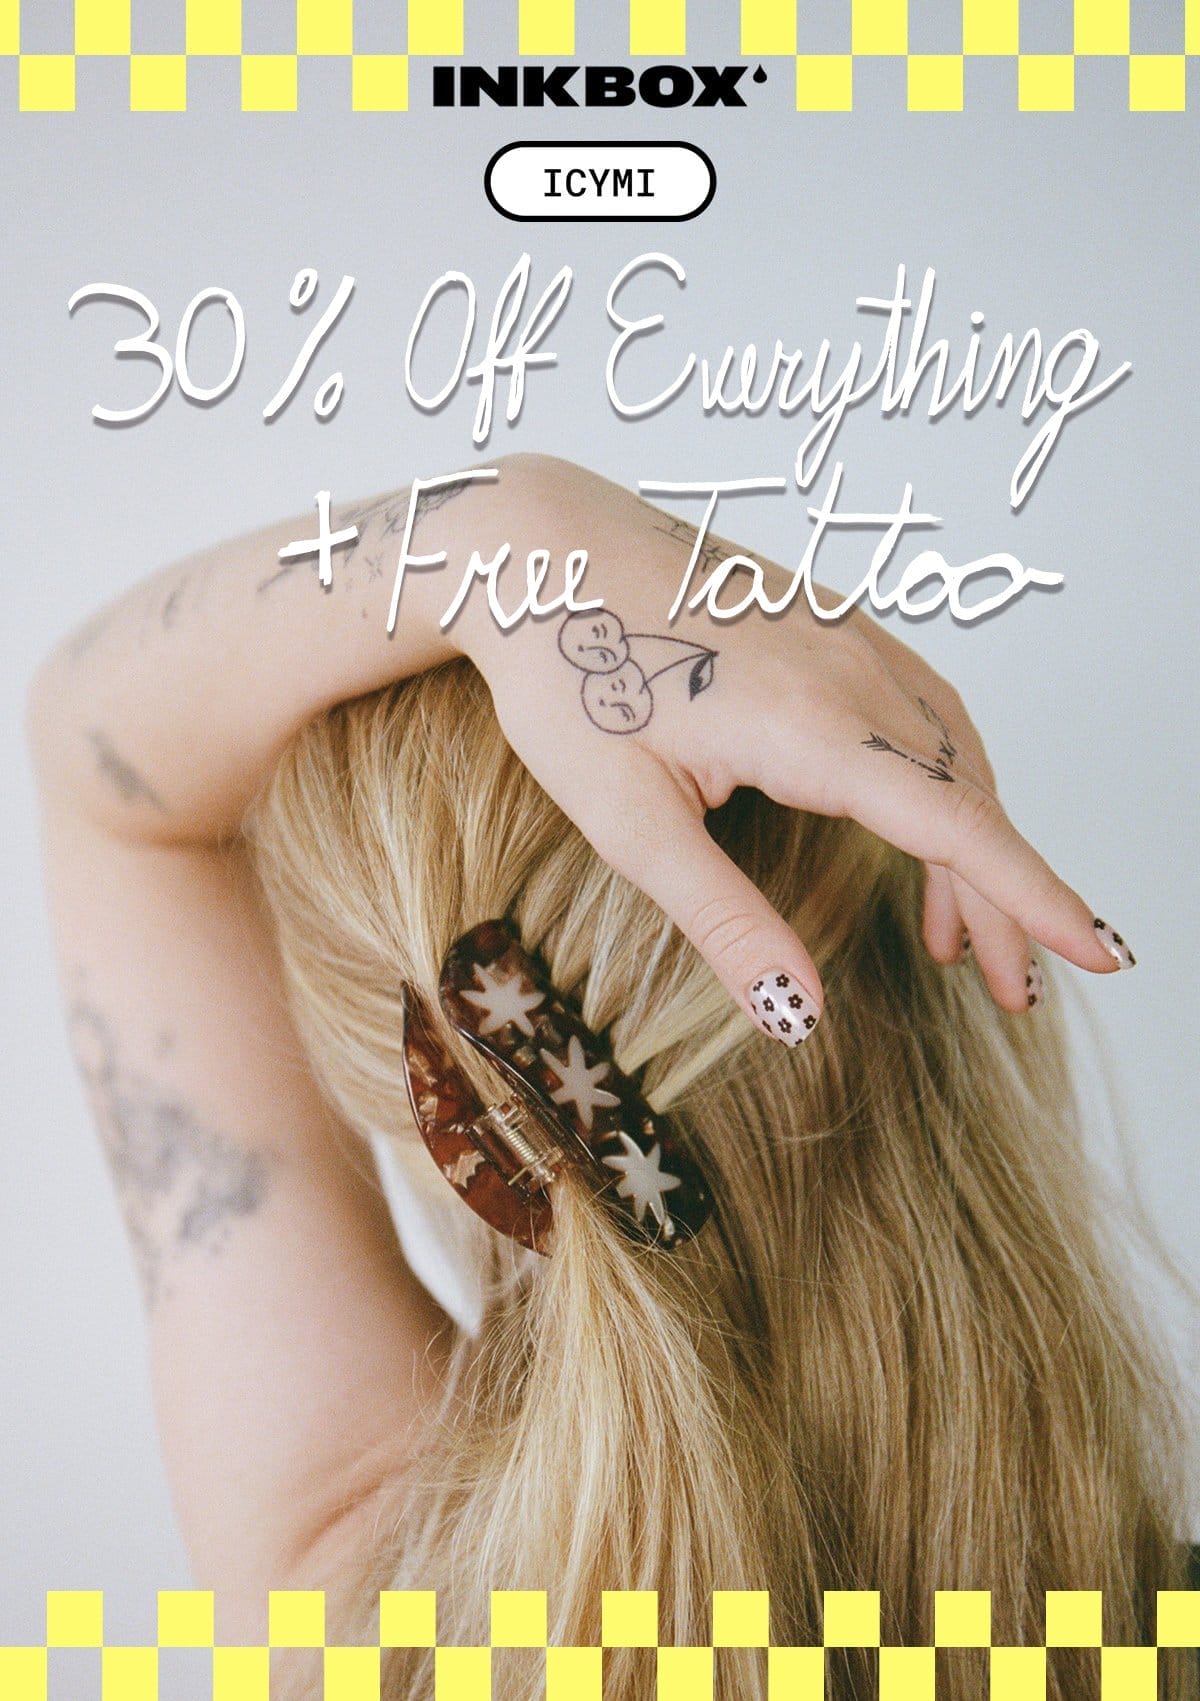 Take up to 50% off tiered discounts at Inkbox